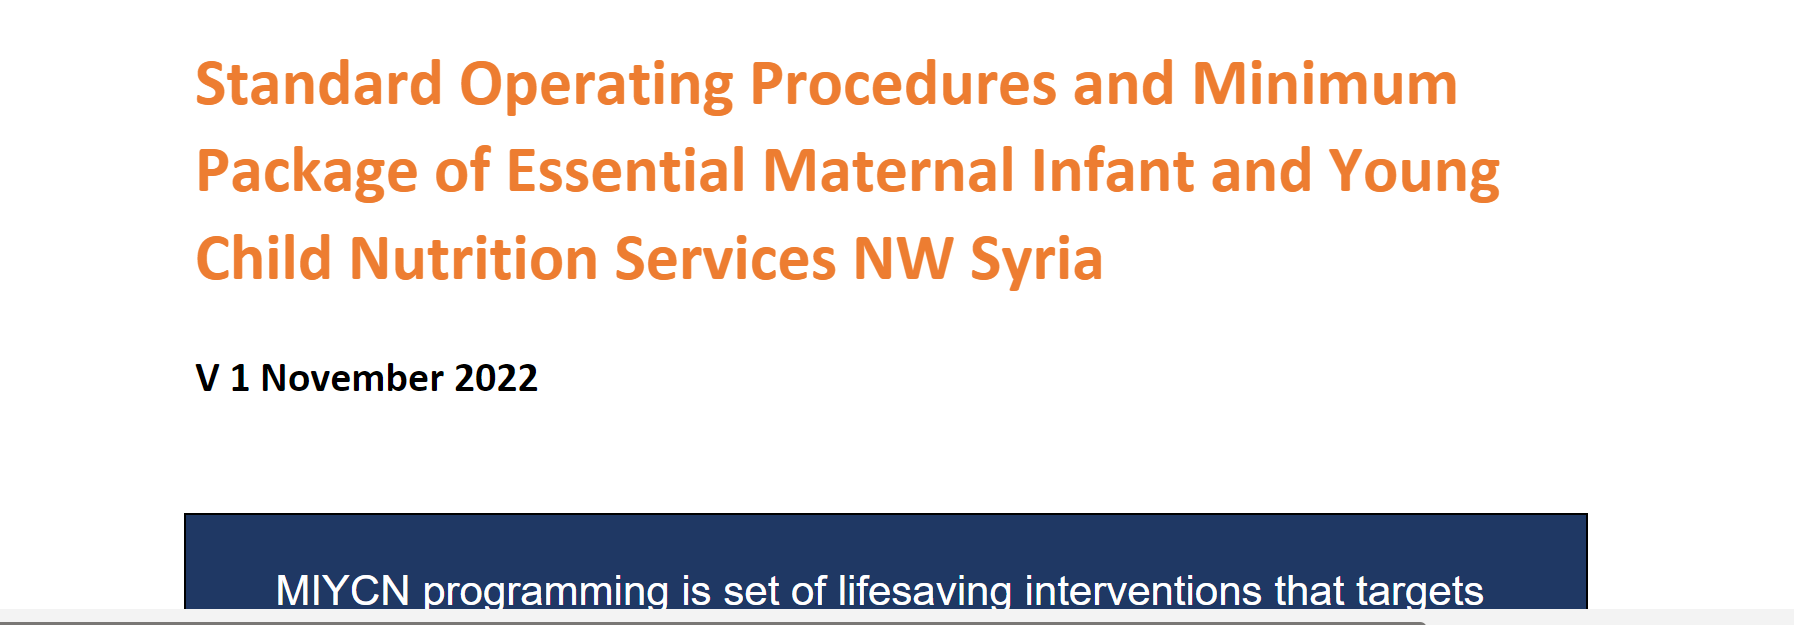 SOP- Minimum package of Essential Maternal Infant and Young Child nutrition services 